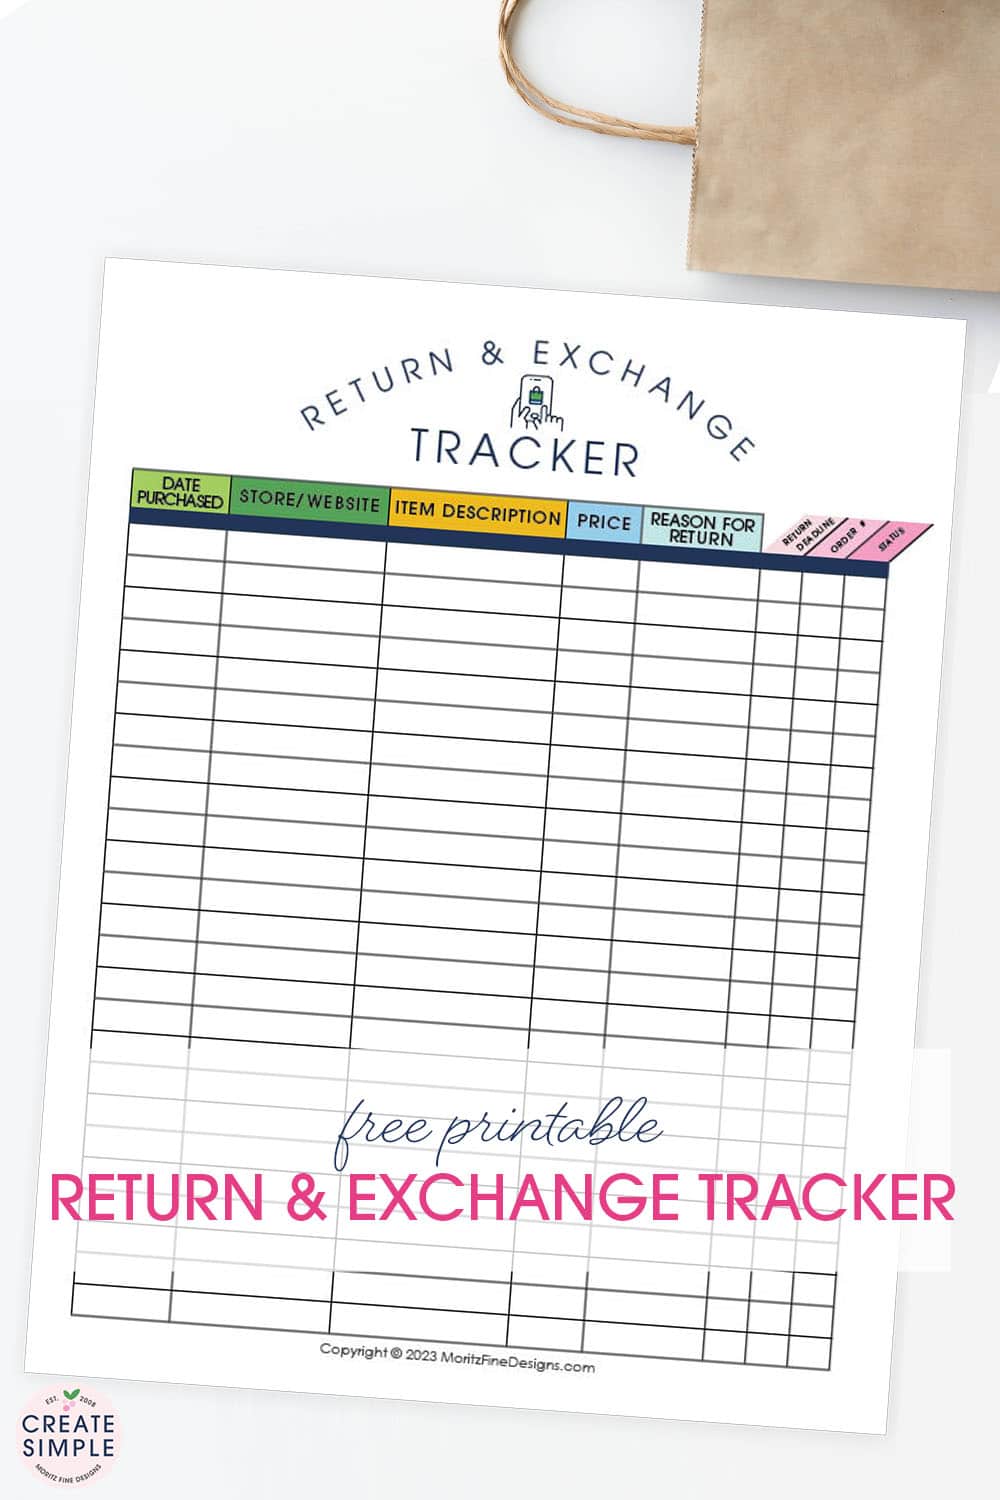 Manage, organize, and keep track of all your after holiday returns with the free printable Return & Exchange Tracker.